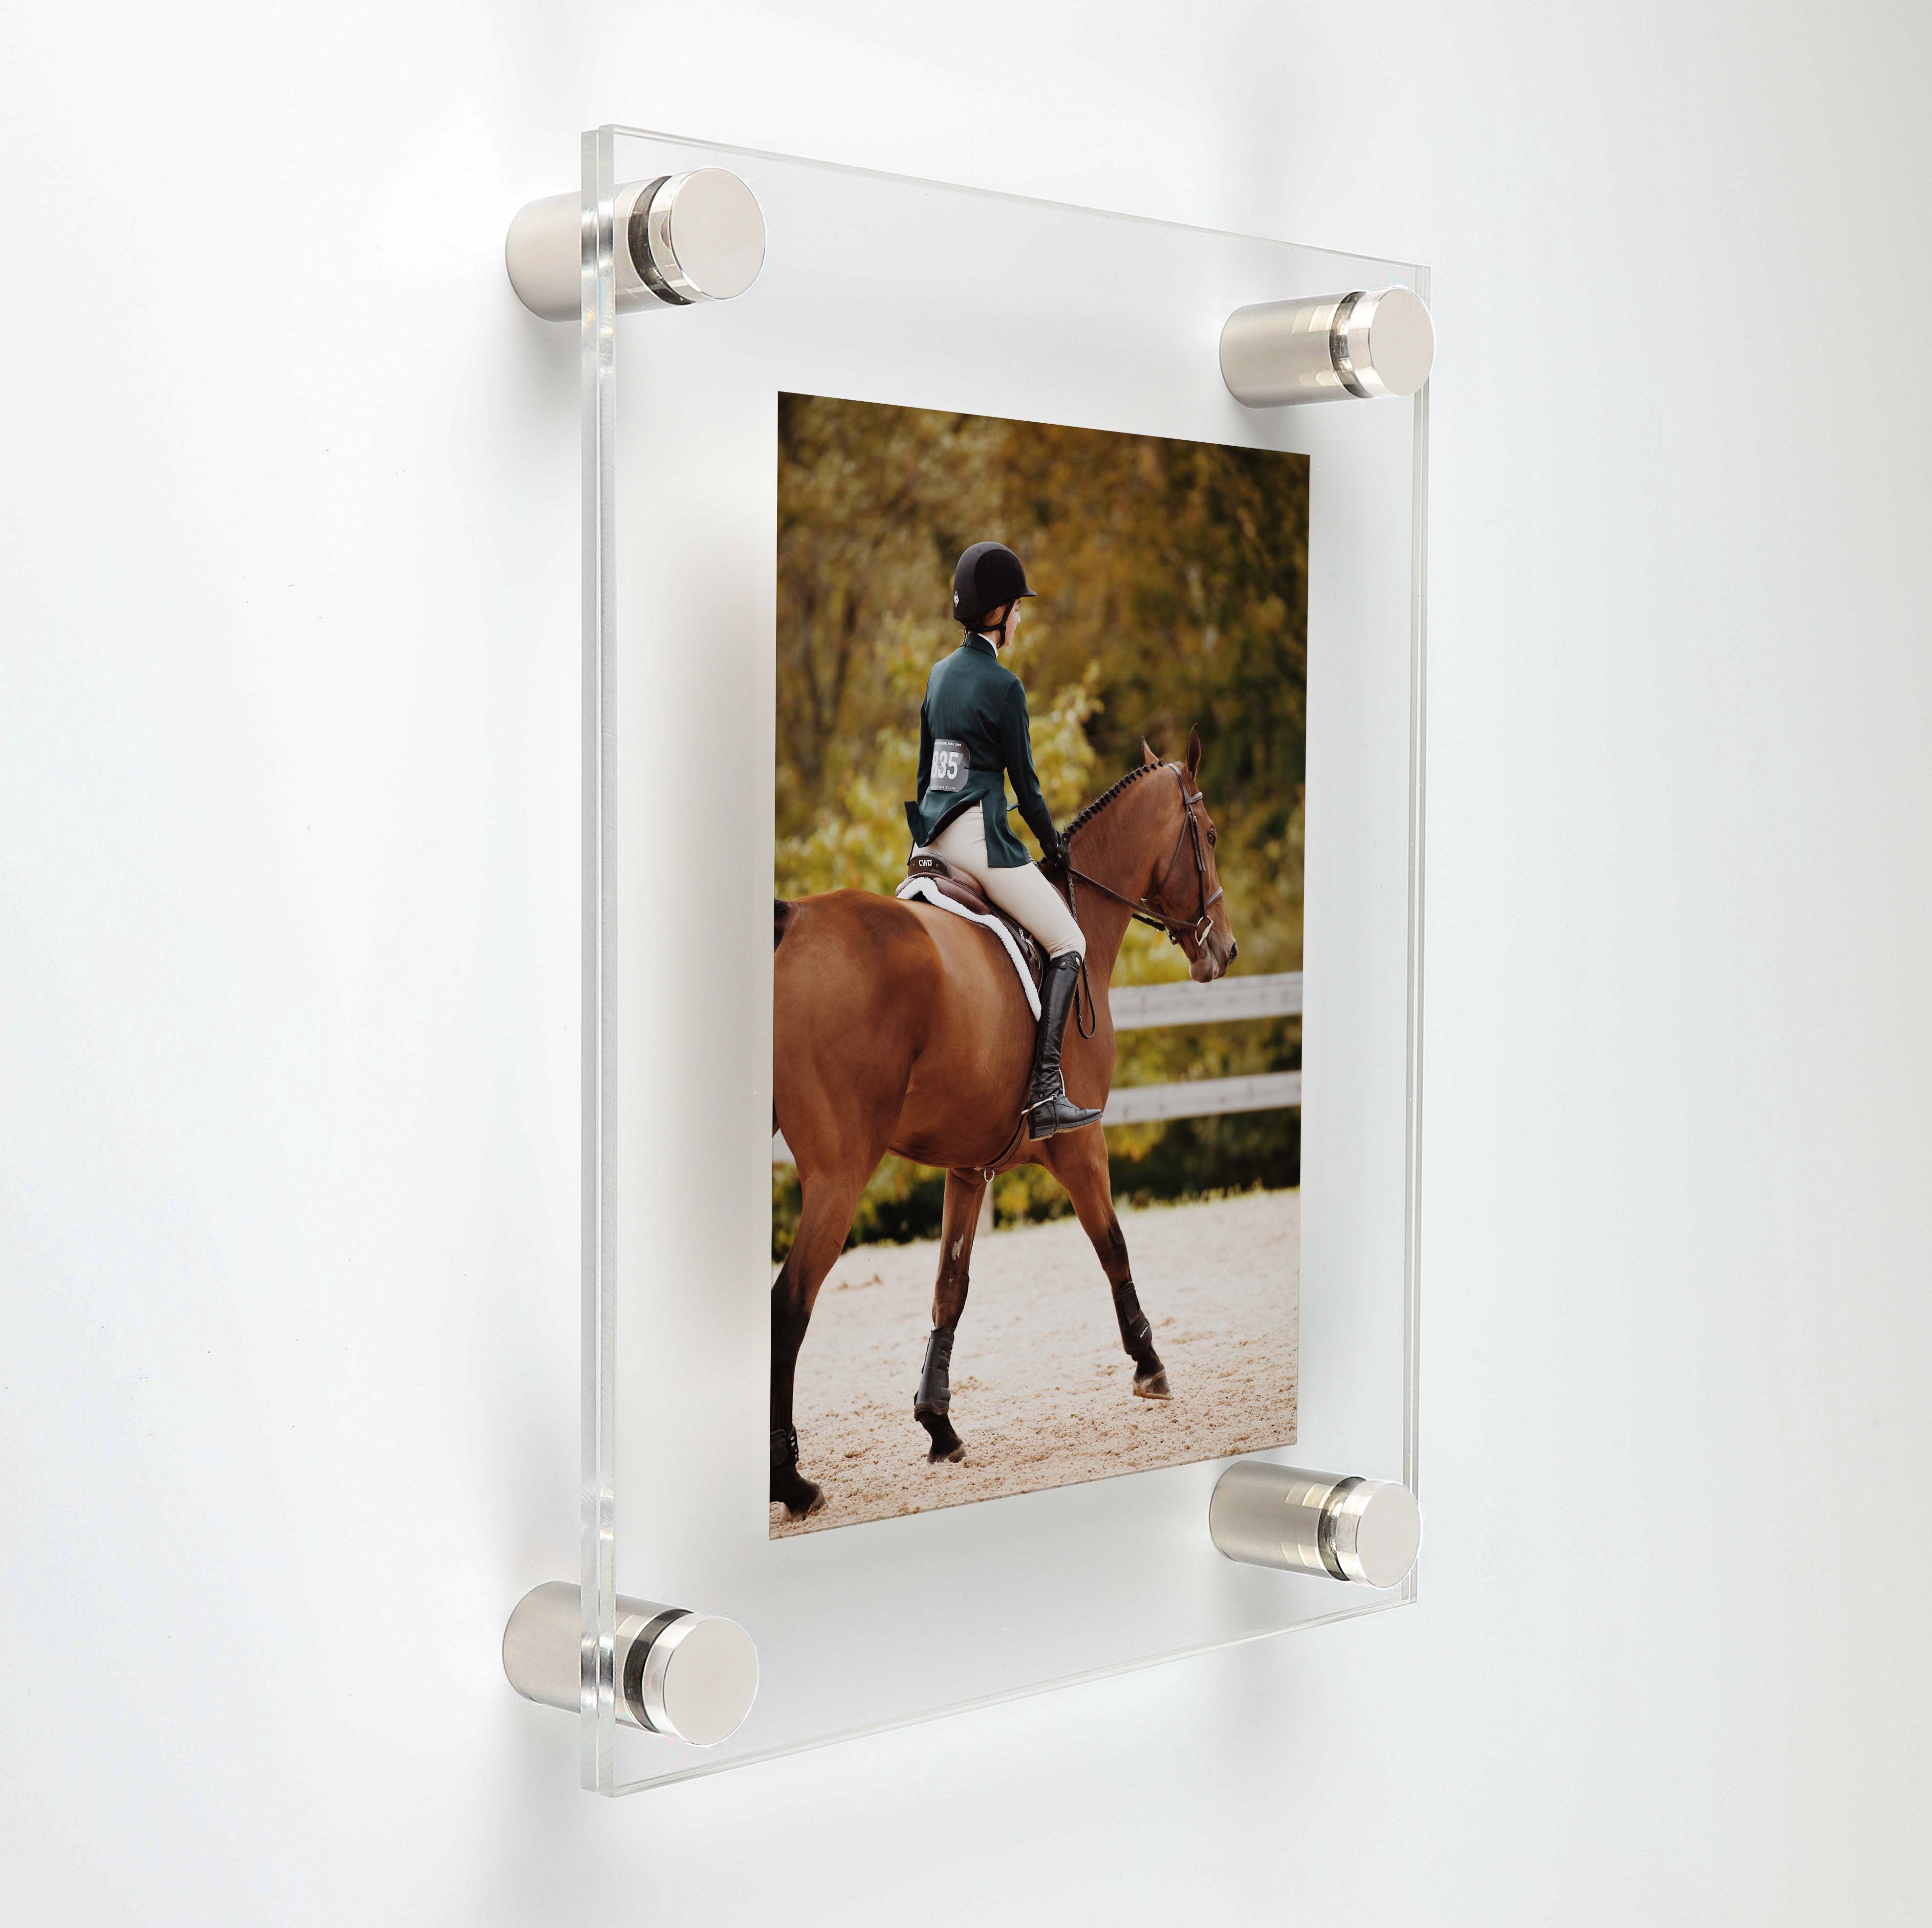 (2) 19-3/4'' x 26'' Clear Acrylics , Pre-Drilled With Polished Edges (Thick 3/16'' each), Wall Frame with (4) 3/4'' x 3/4'' Polished Stainless Steel Standoffs includes Screws and Anchors